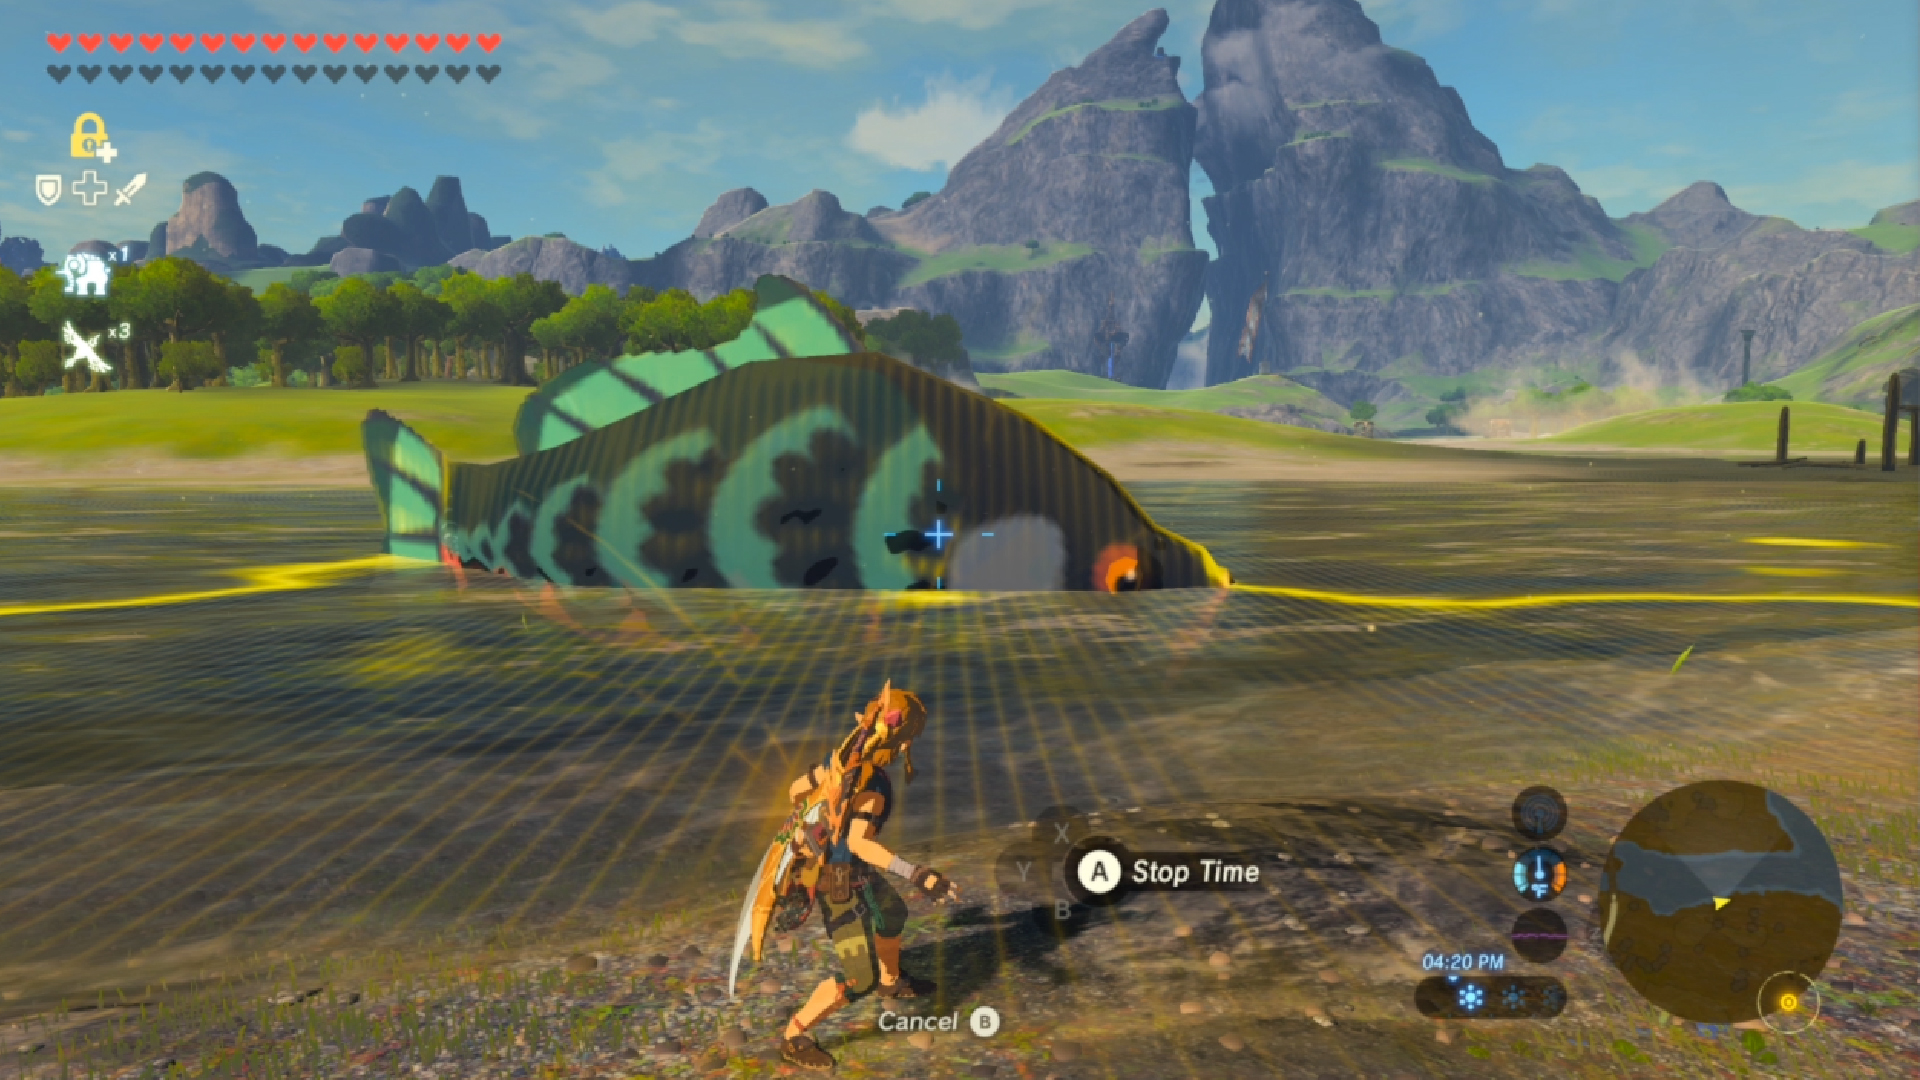 Mods at The Legend of Zelda: Breath of the Wild - Mods and community